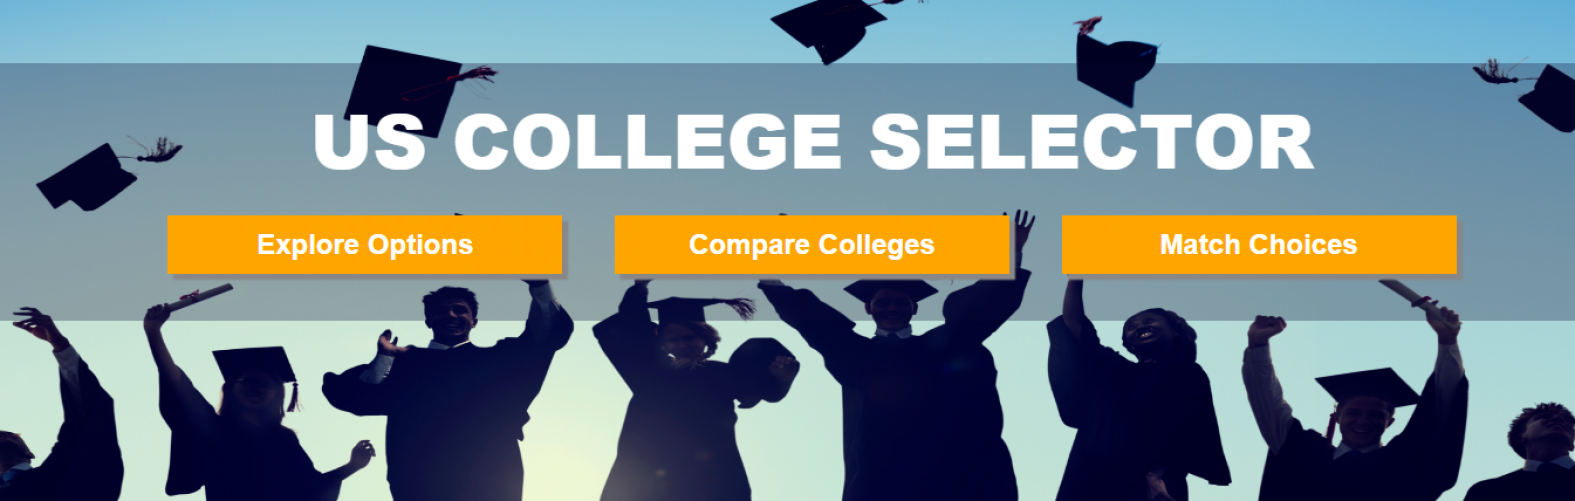 US College Selector